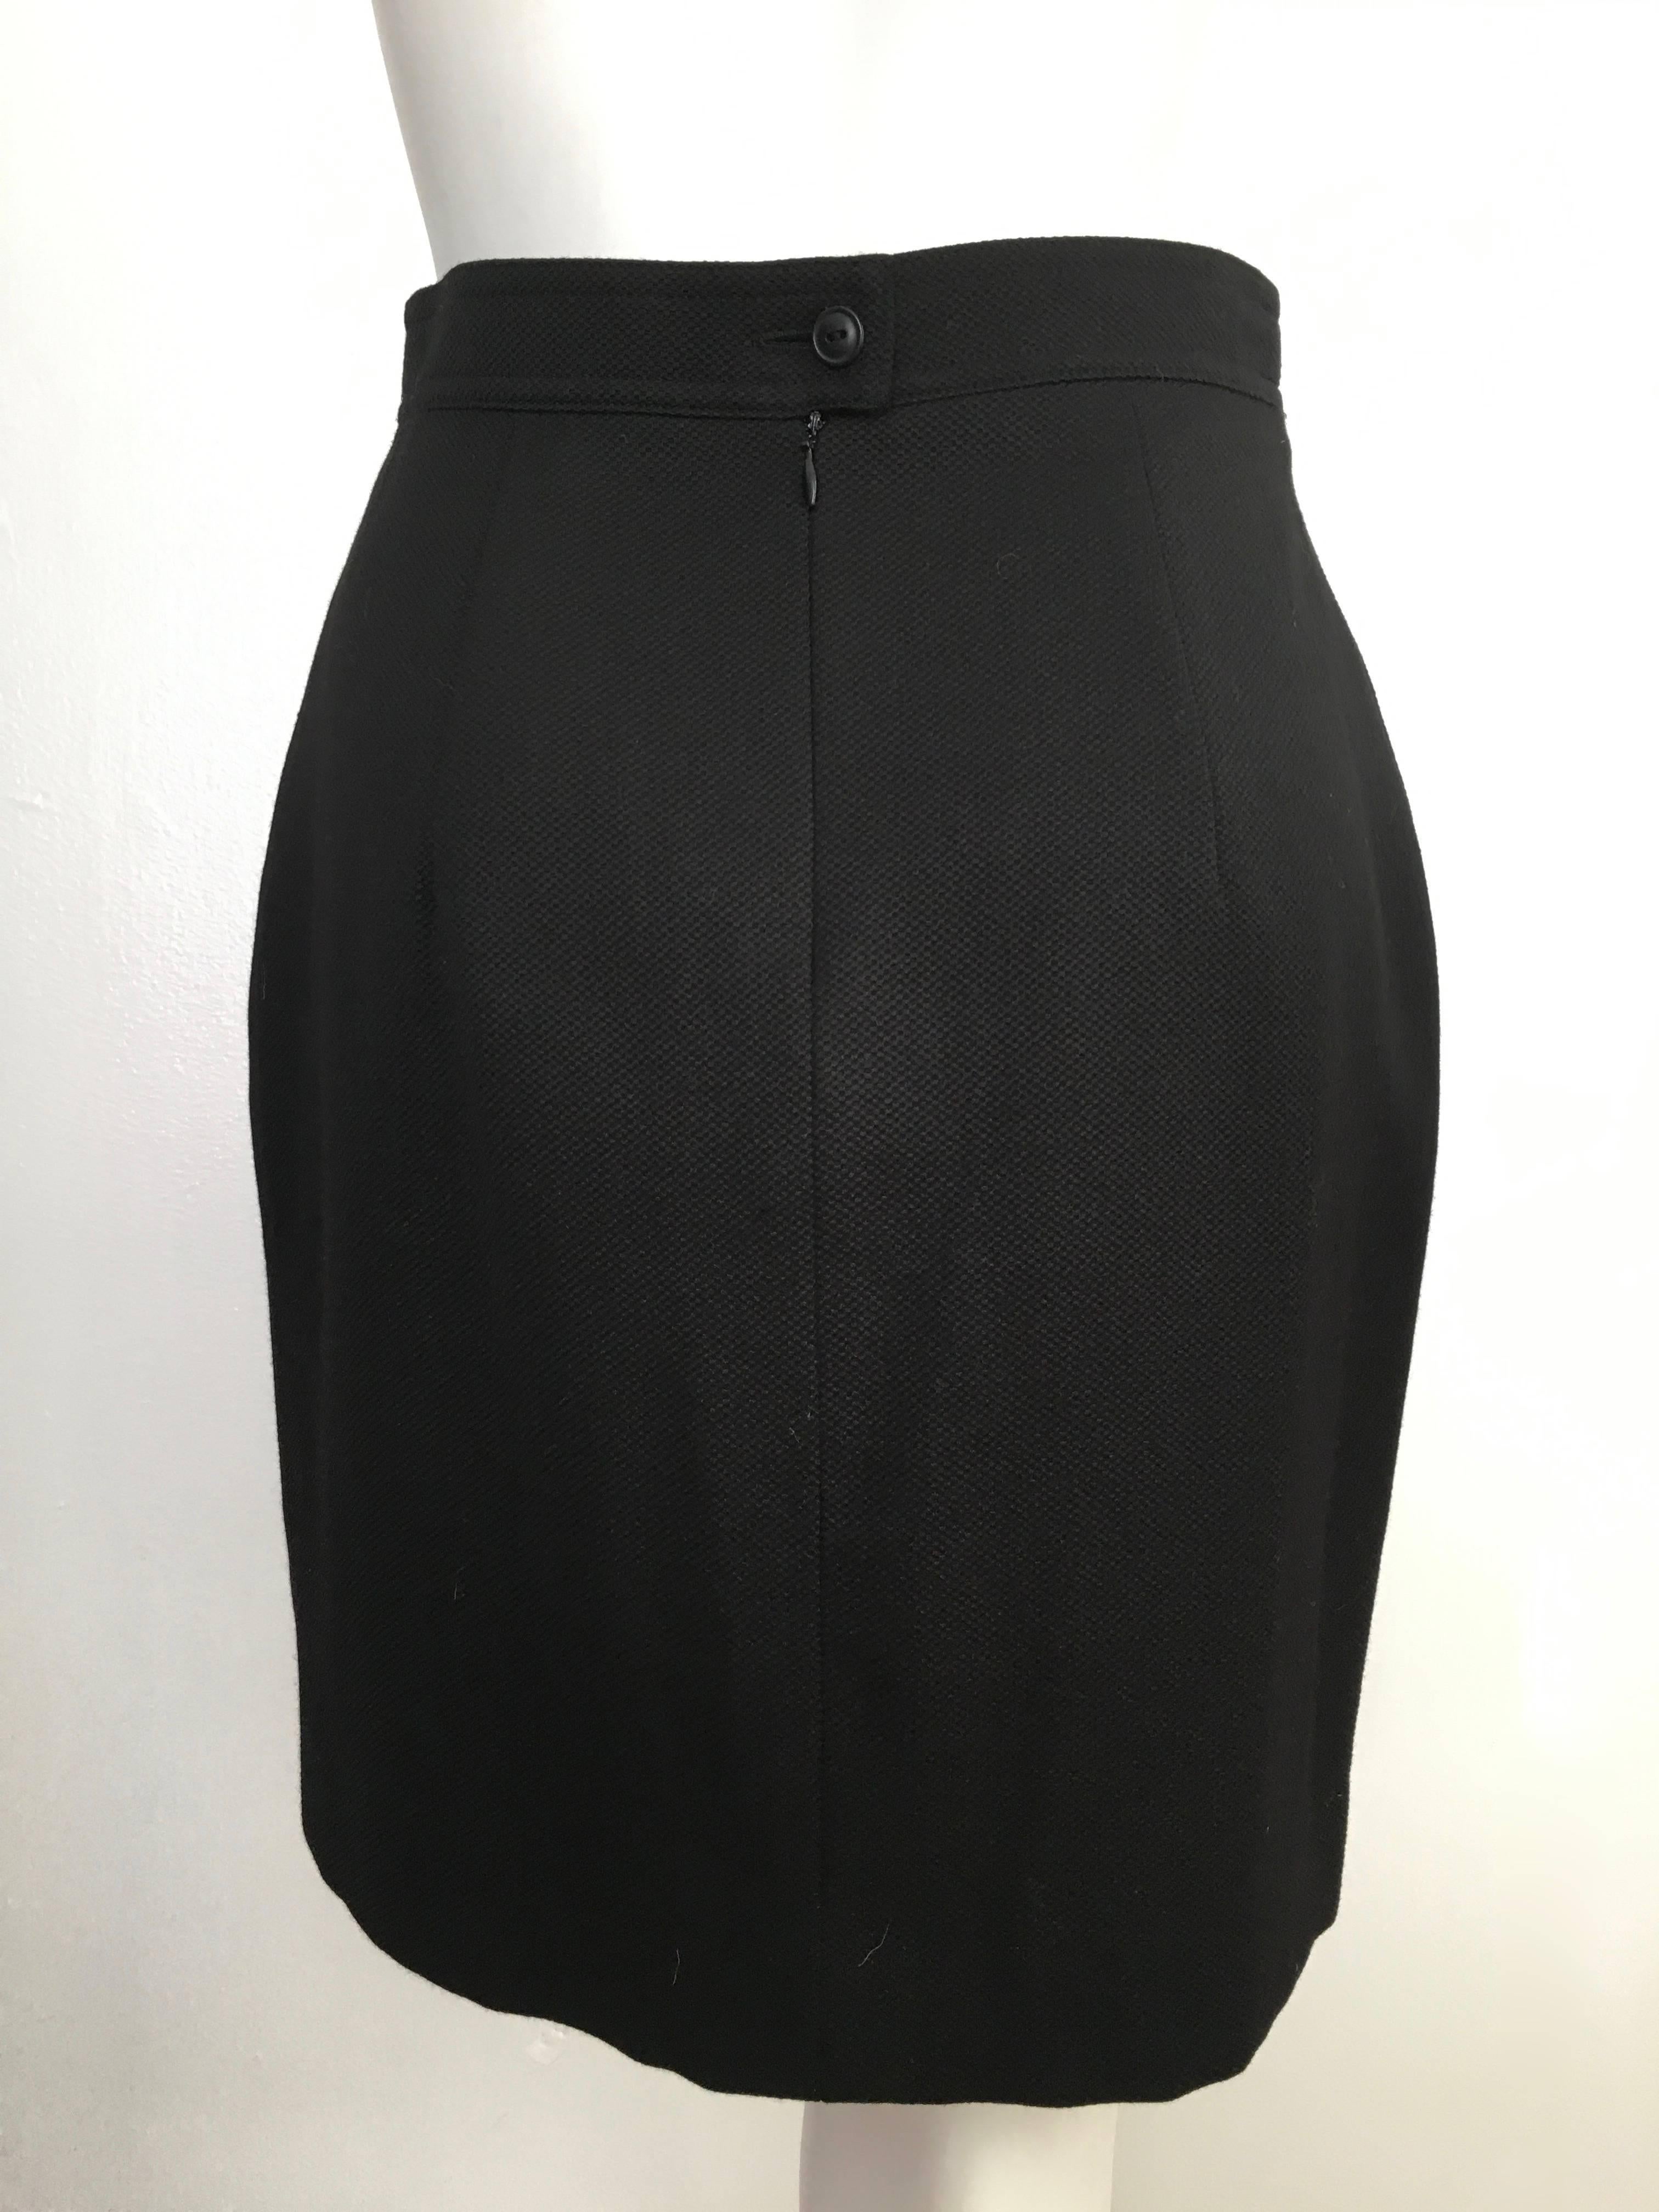 Karl Lagerfeld 1990s Black Wool Pencil Skirt Size 6. For Sale 3